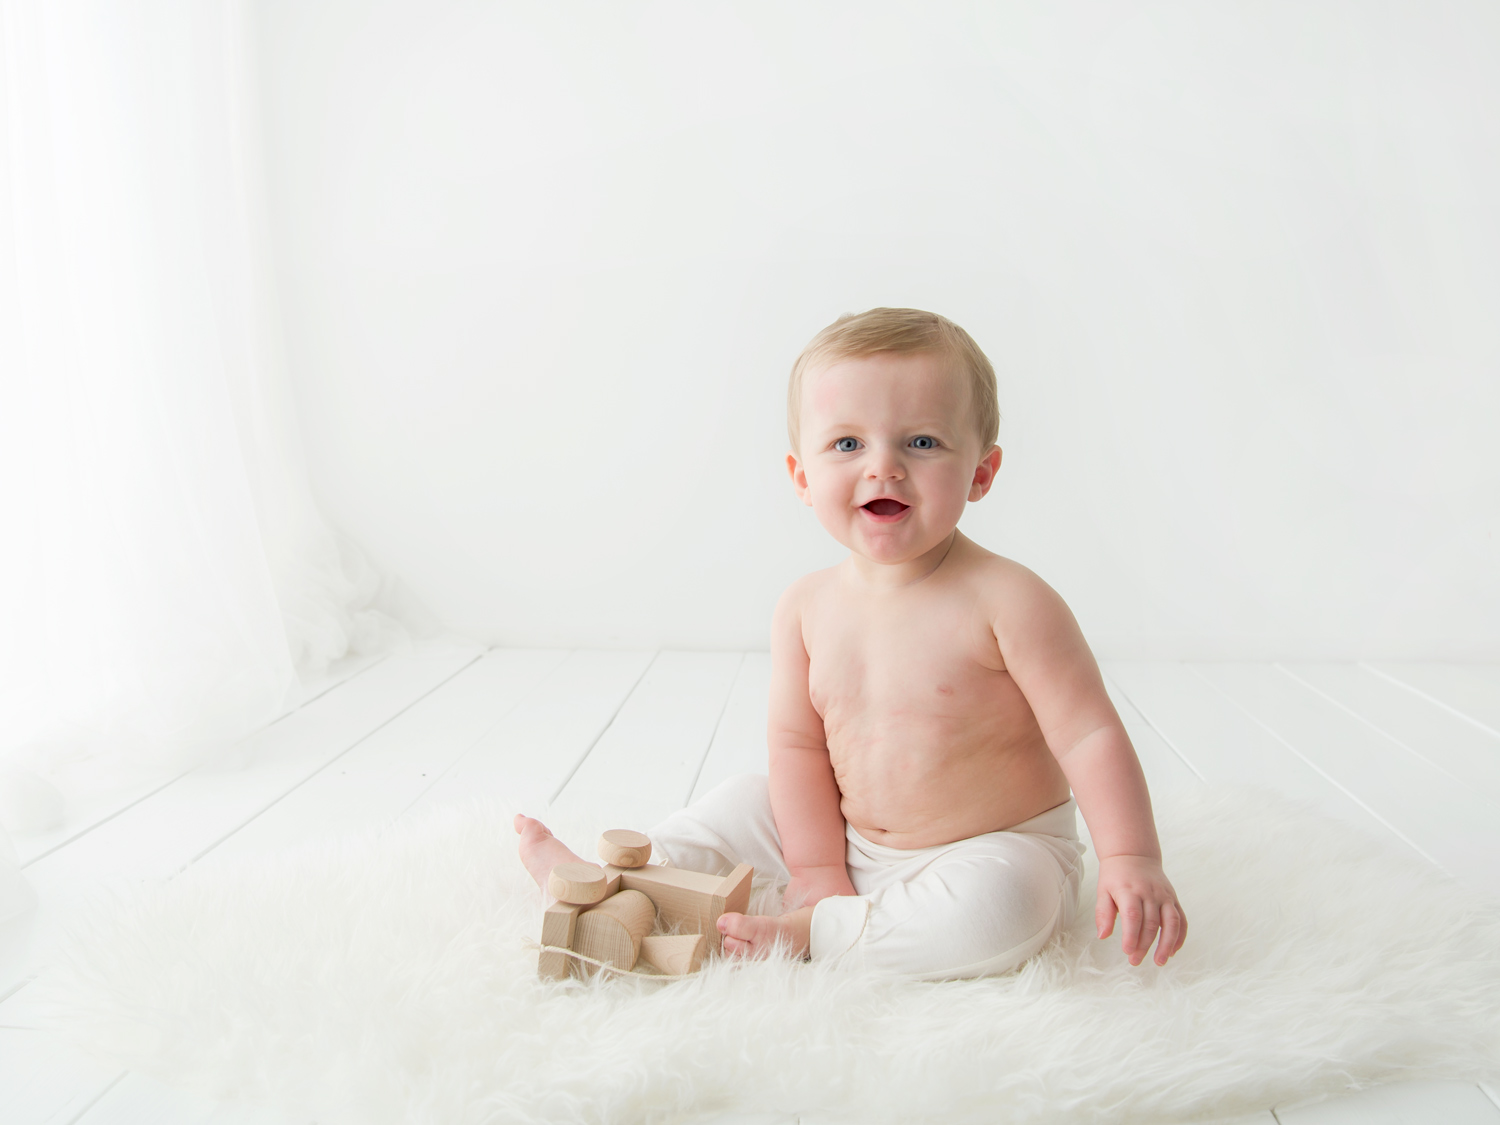 simple white background baby boy with wooden toys